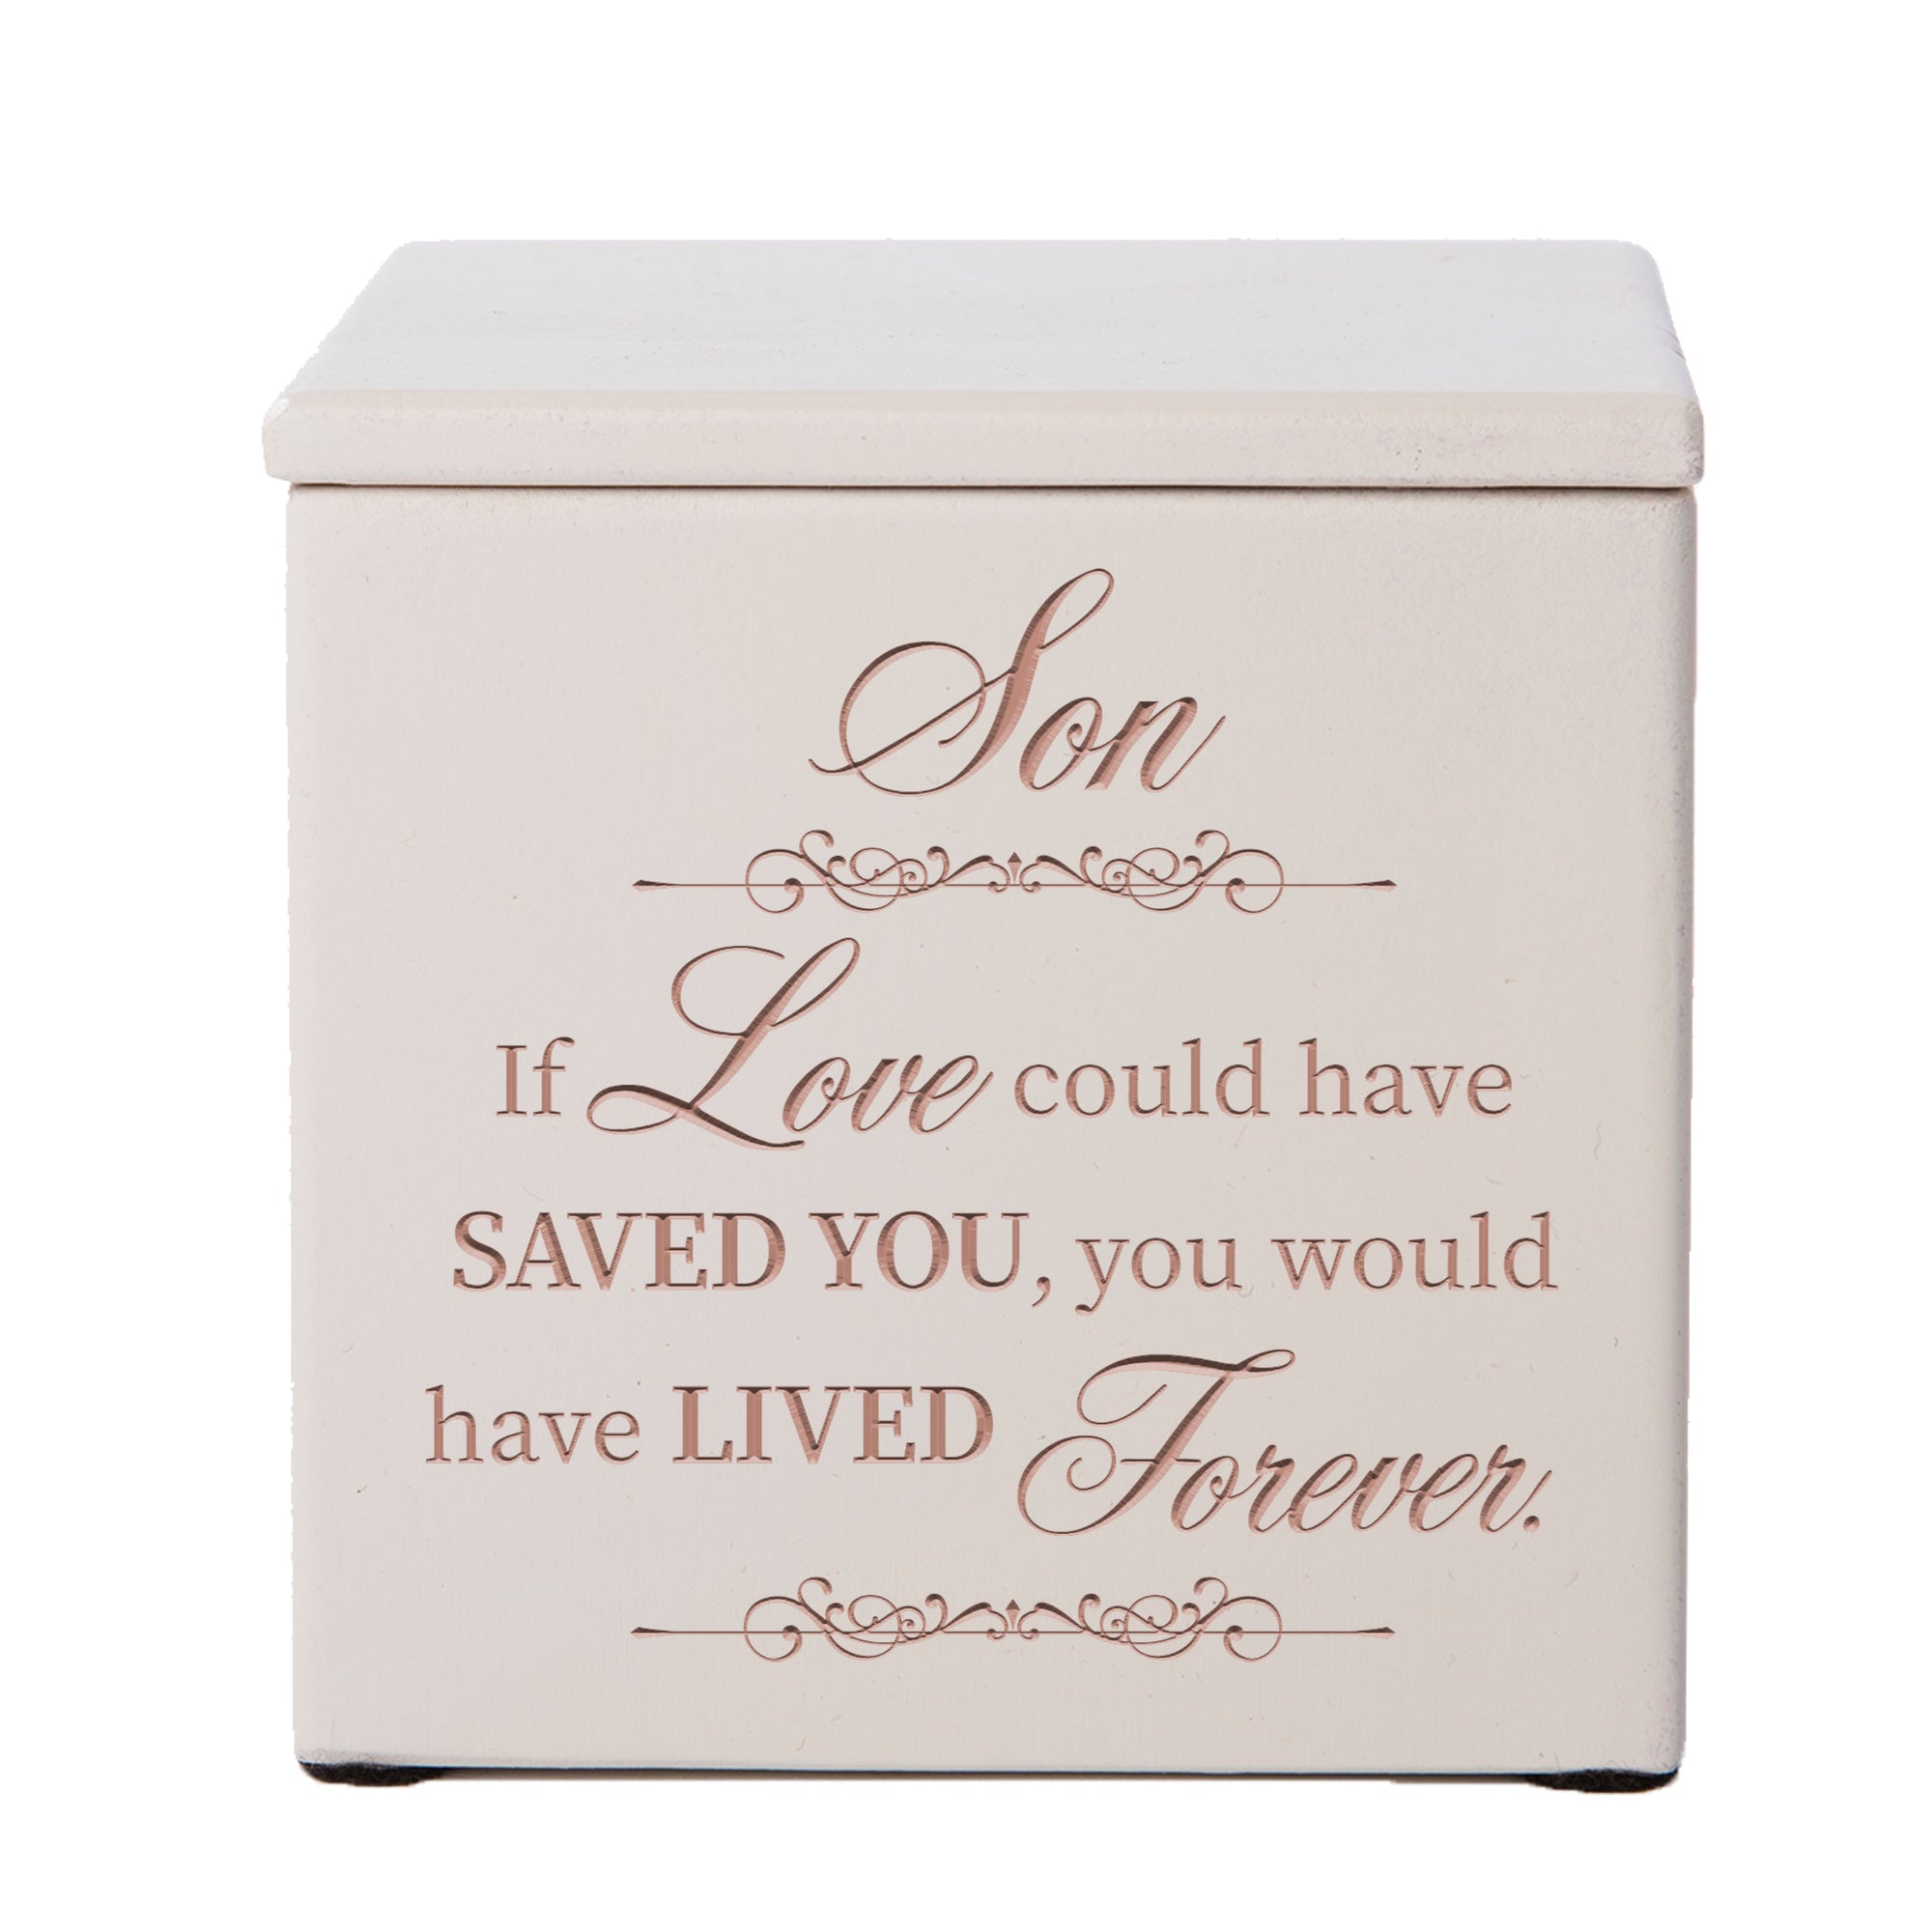 Wooden Memorial Cremation Urn Keepsake Box for Human or Pet Ashes - If Love Could, Son